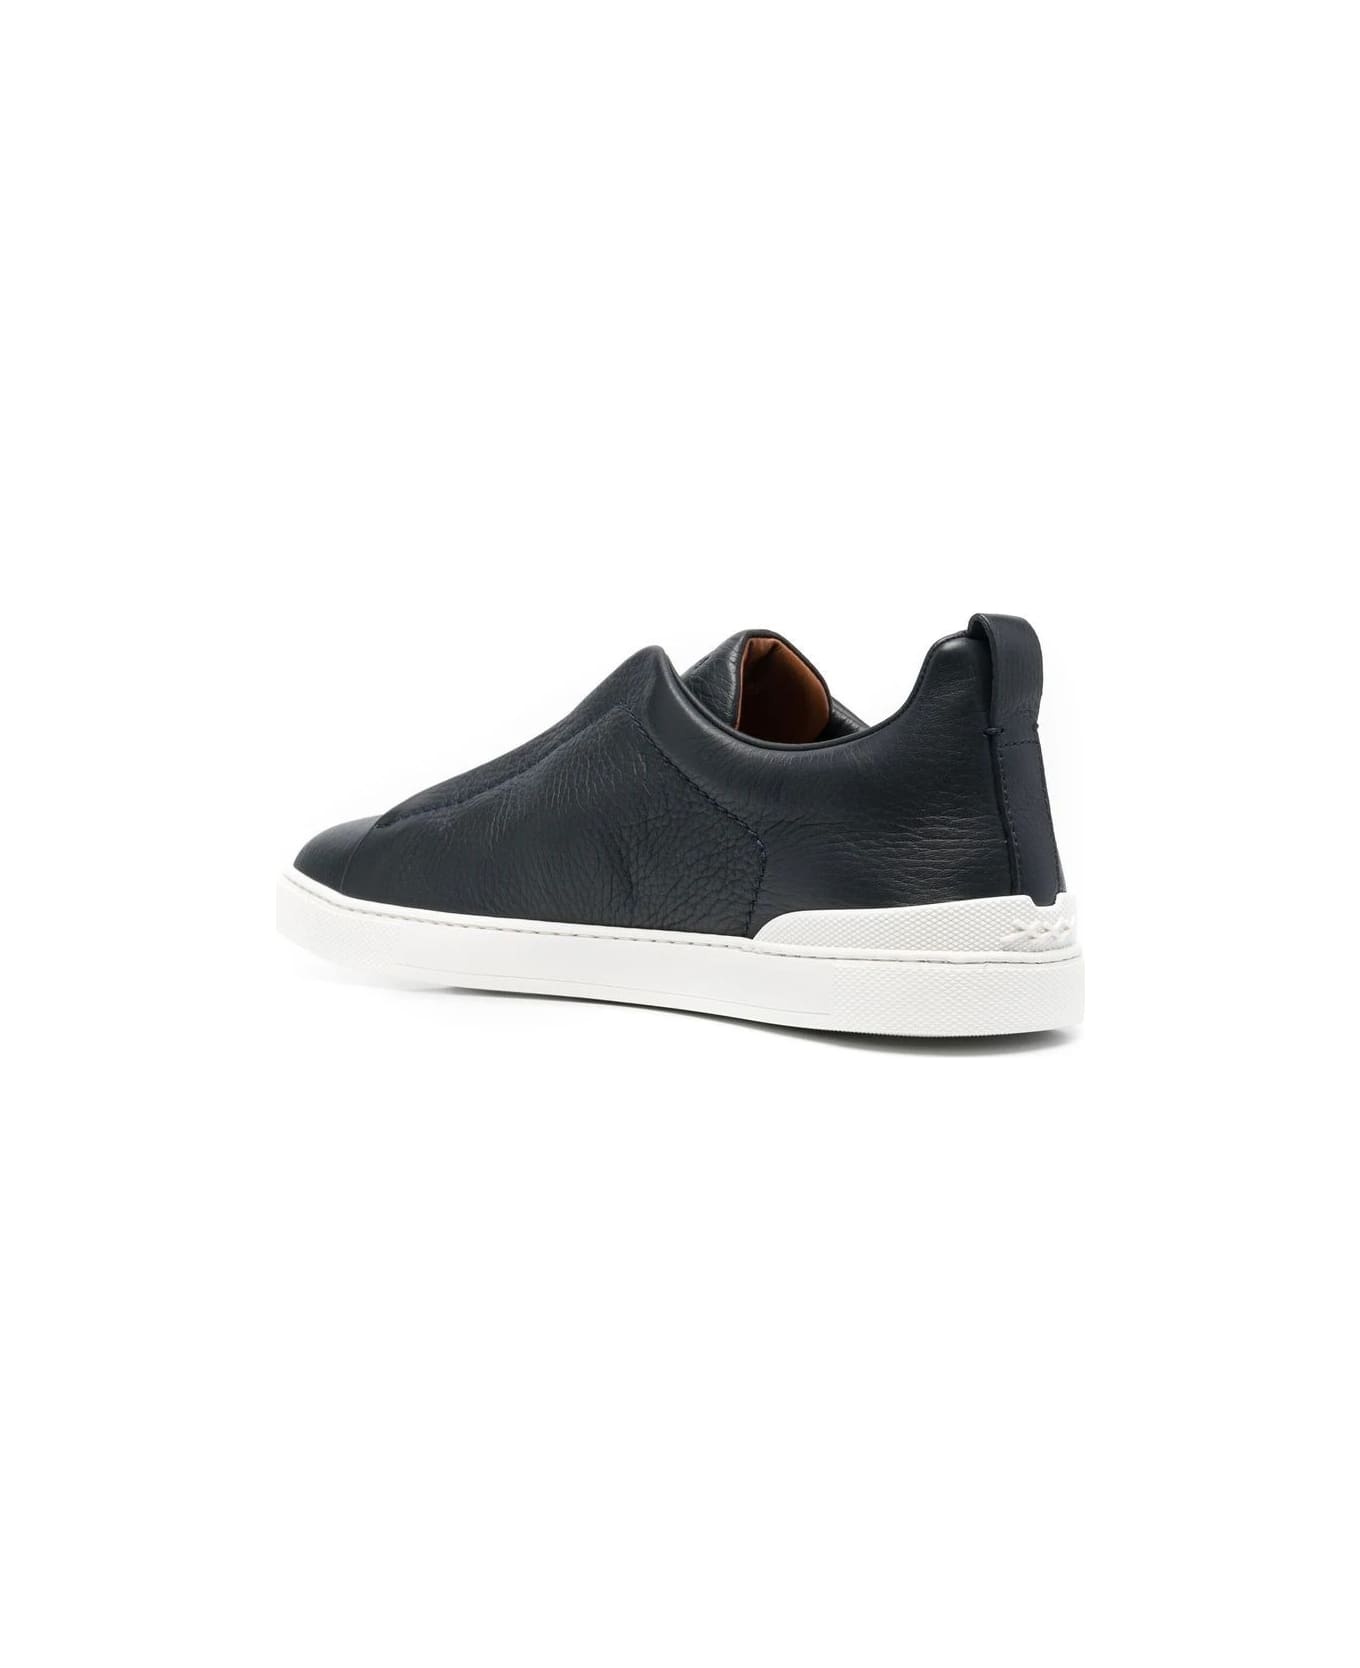 Zegna Triple Stitch Sneakers In Navy Blue Leather - Blue